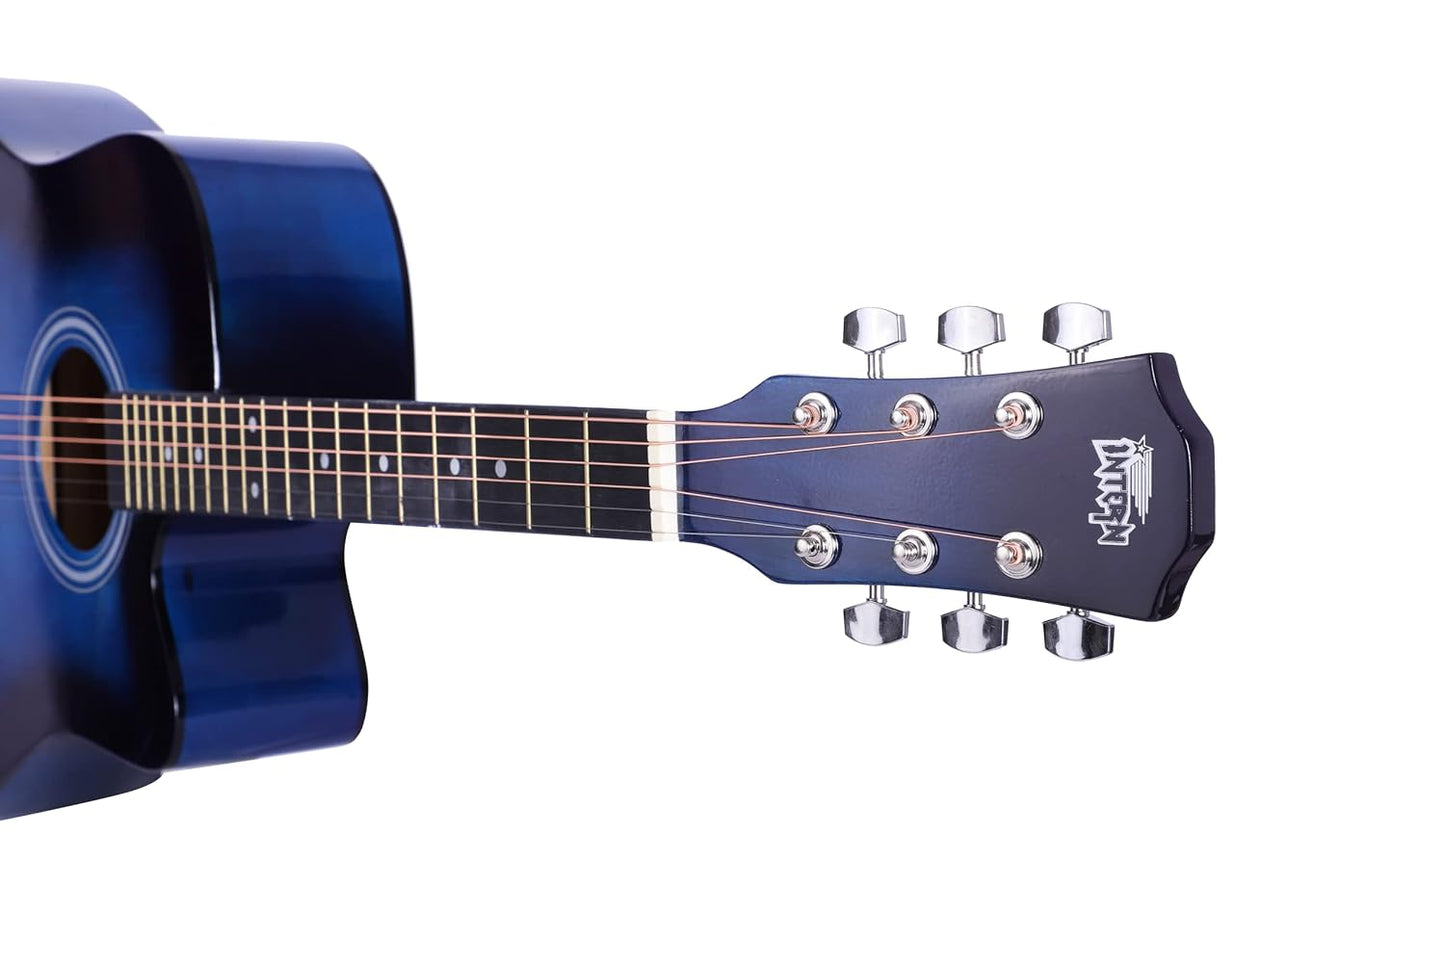 INTERN 41 inches Acoustic Guitar with truss rod. Includes carry bag, strings pack, strap & plectrums. Premium Wooden durable built, tonal stability & for all age-groups(Electric Blue).